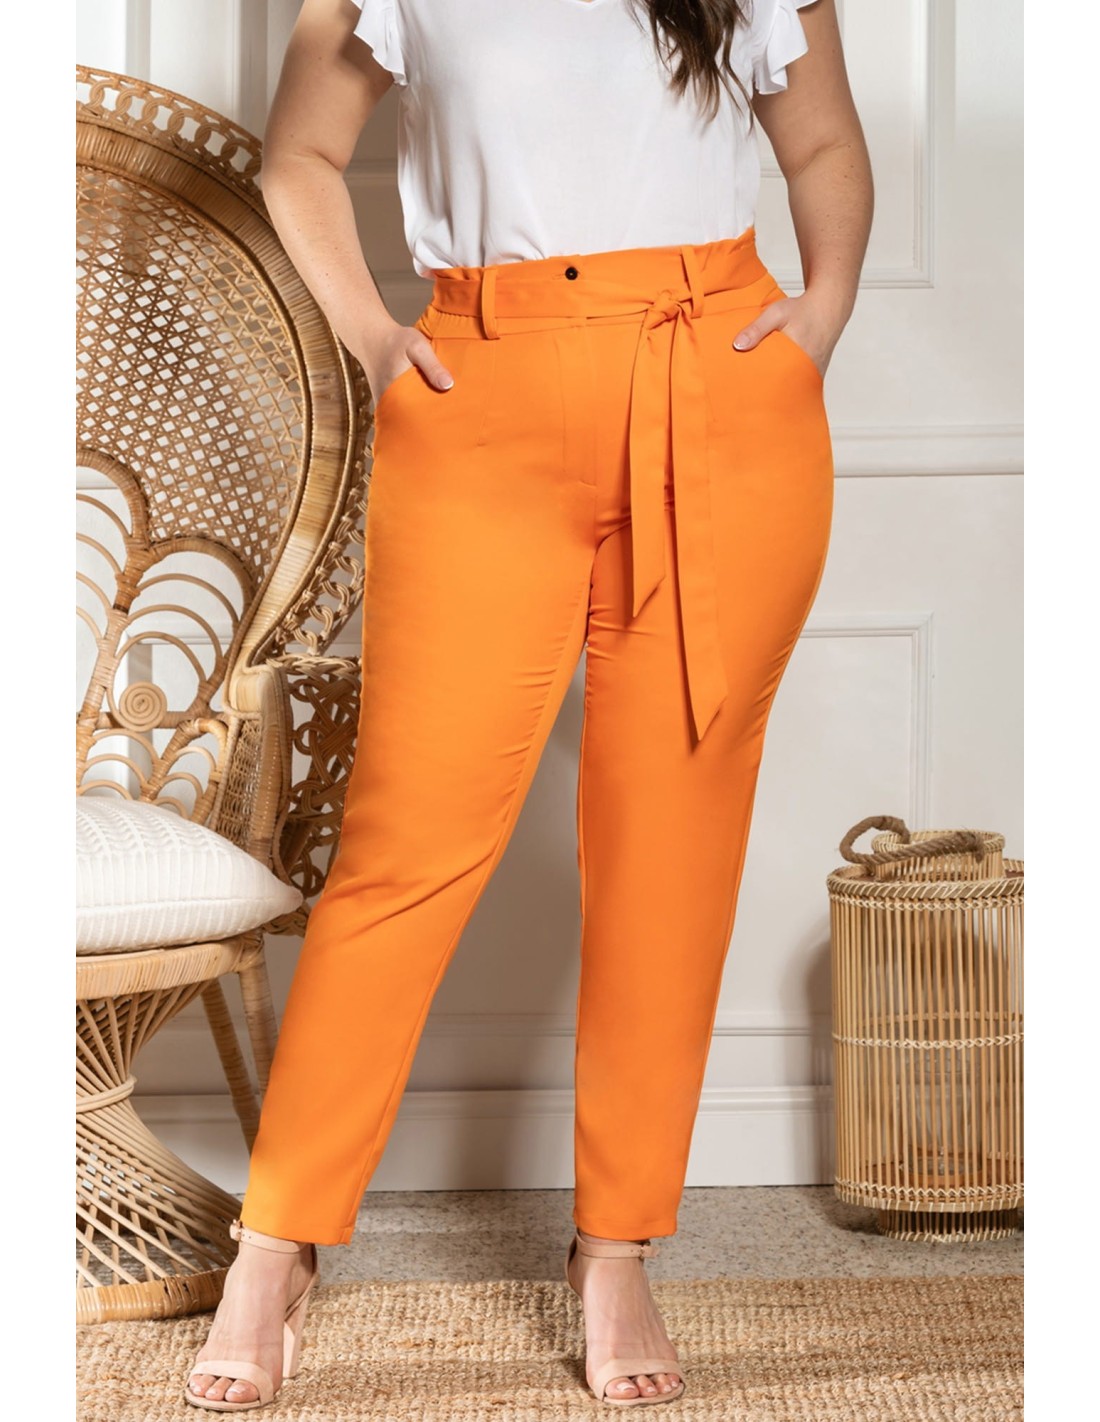 Share 132+ paperbag trousers plus size best - camera.edu.vn